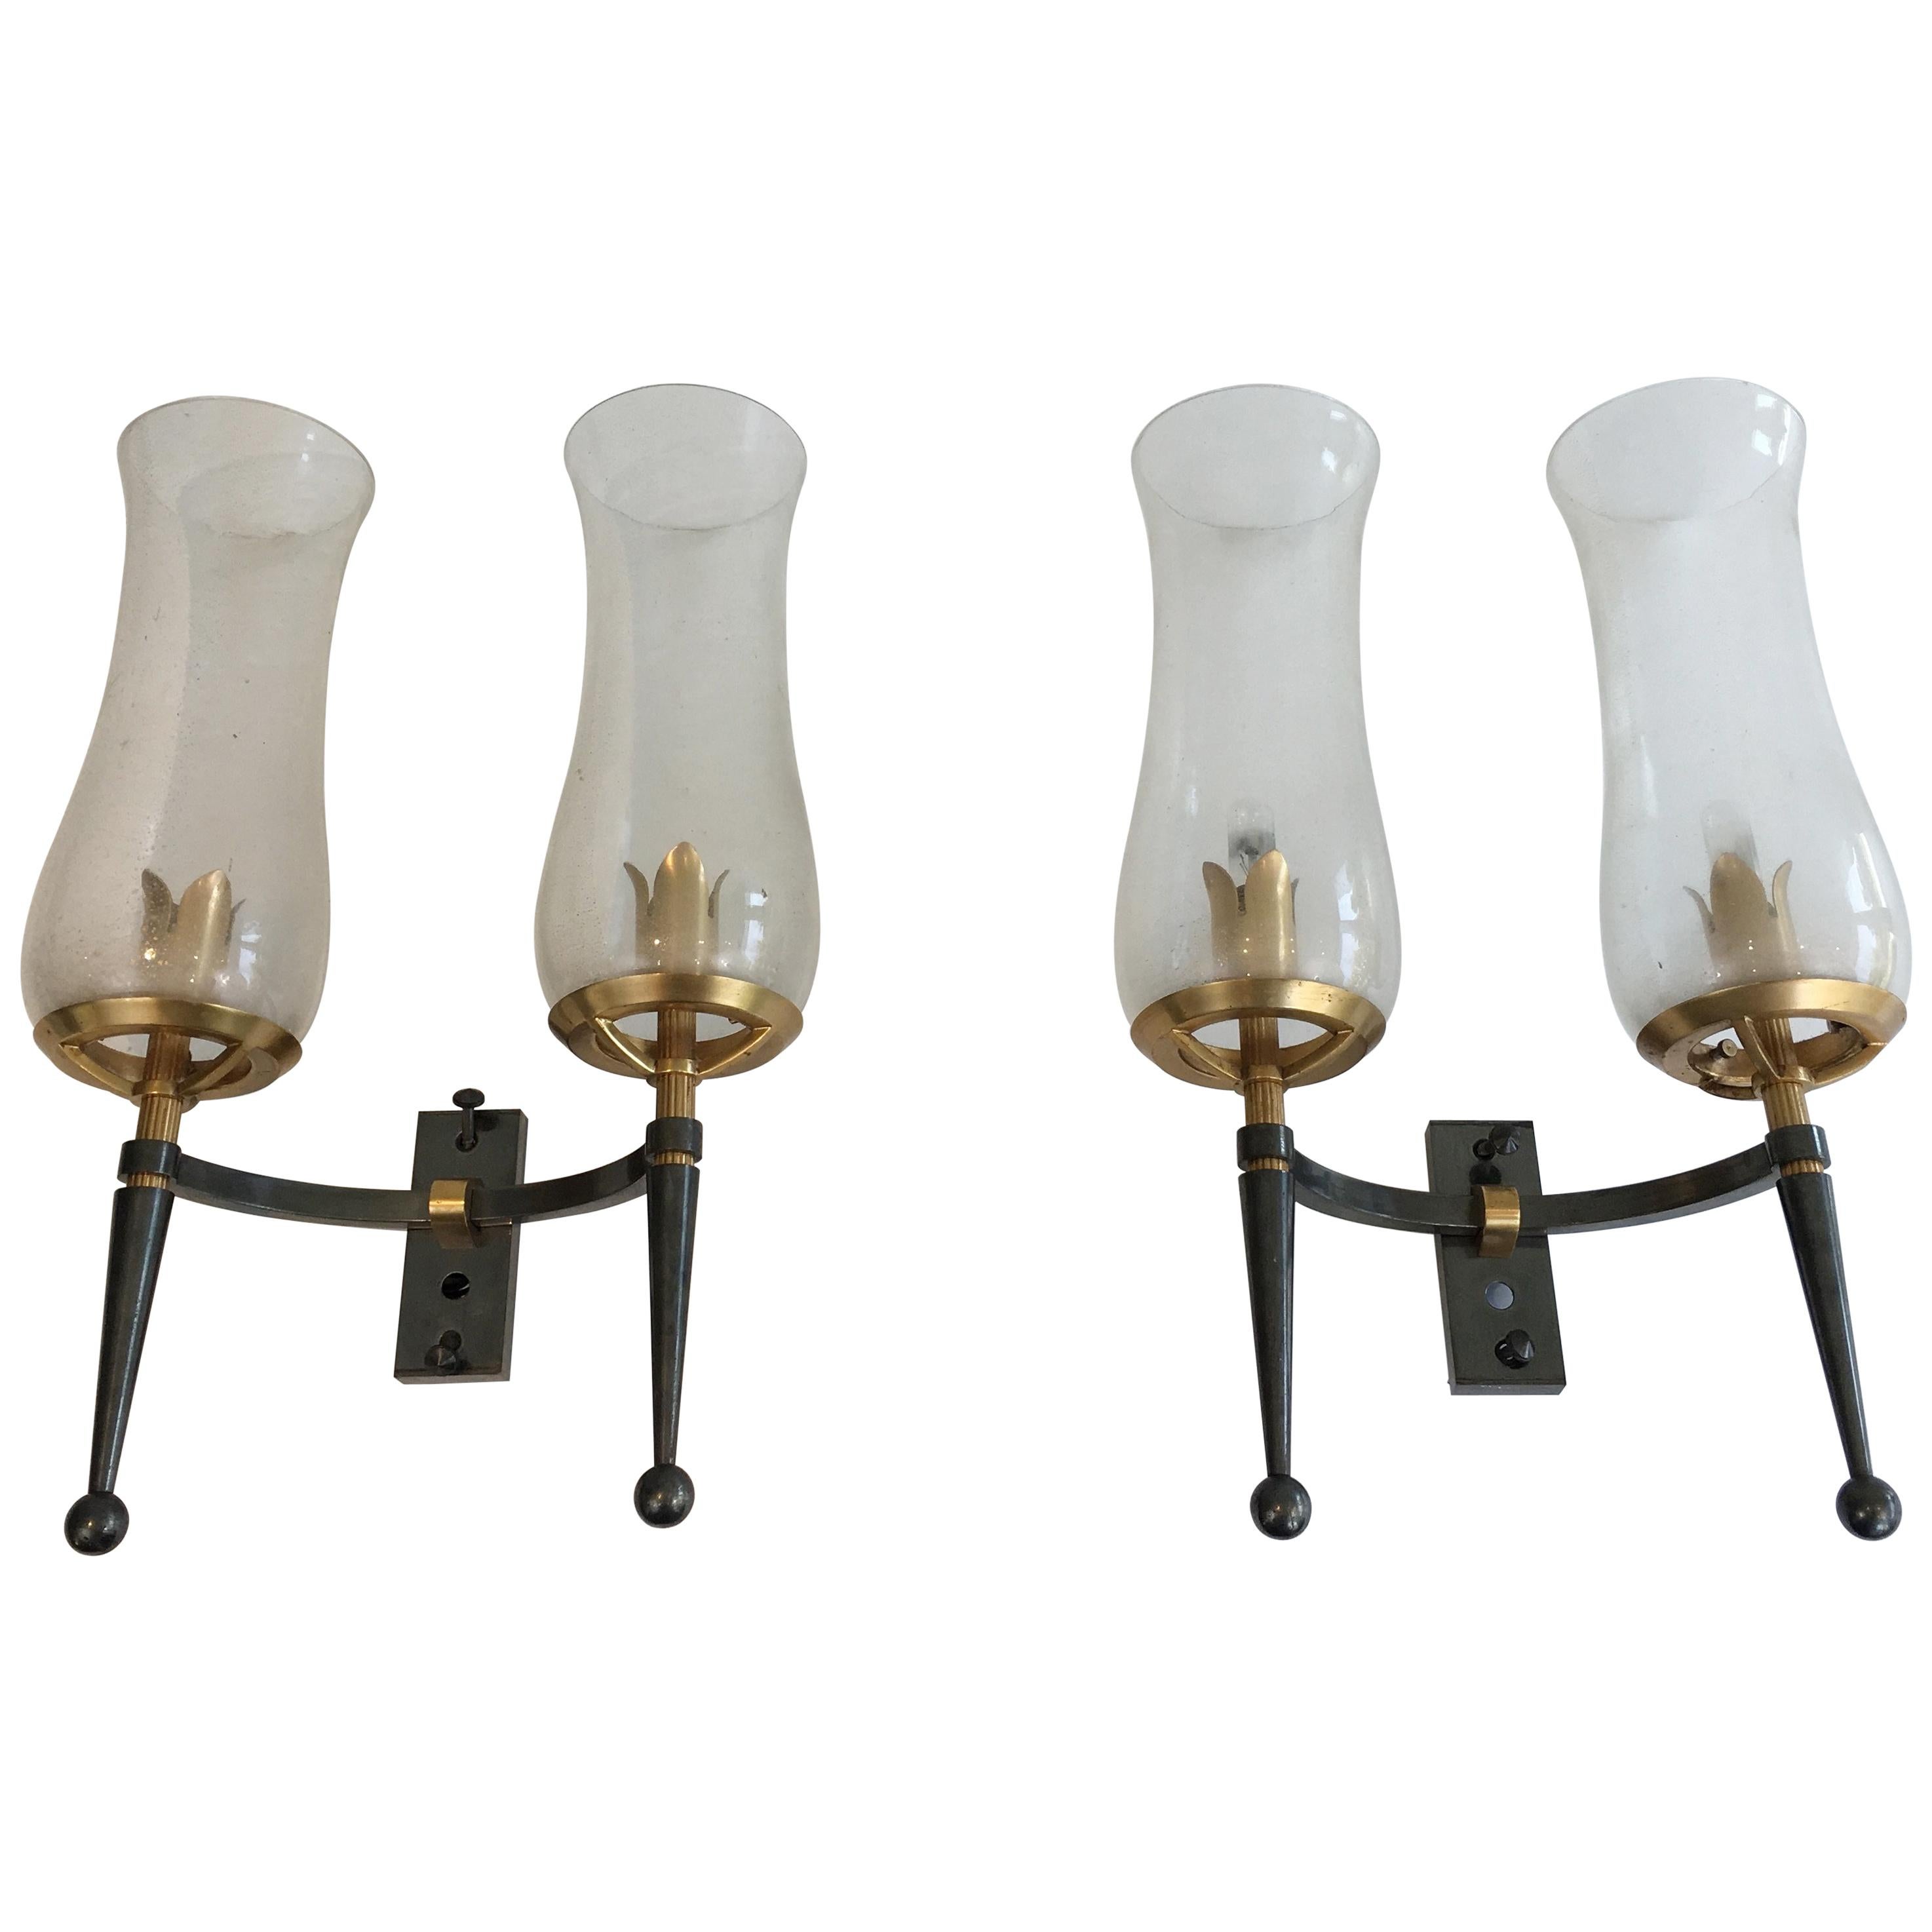 Pair of Gun Metal Steel and Gilt Wall Lights with Champagne Murano Glass